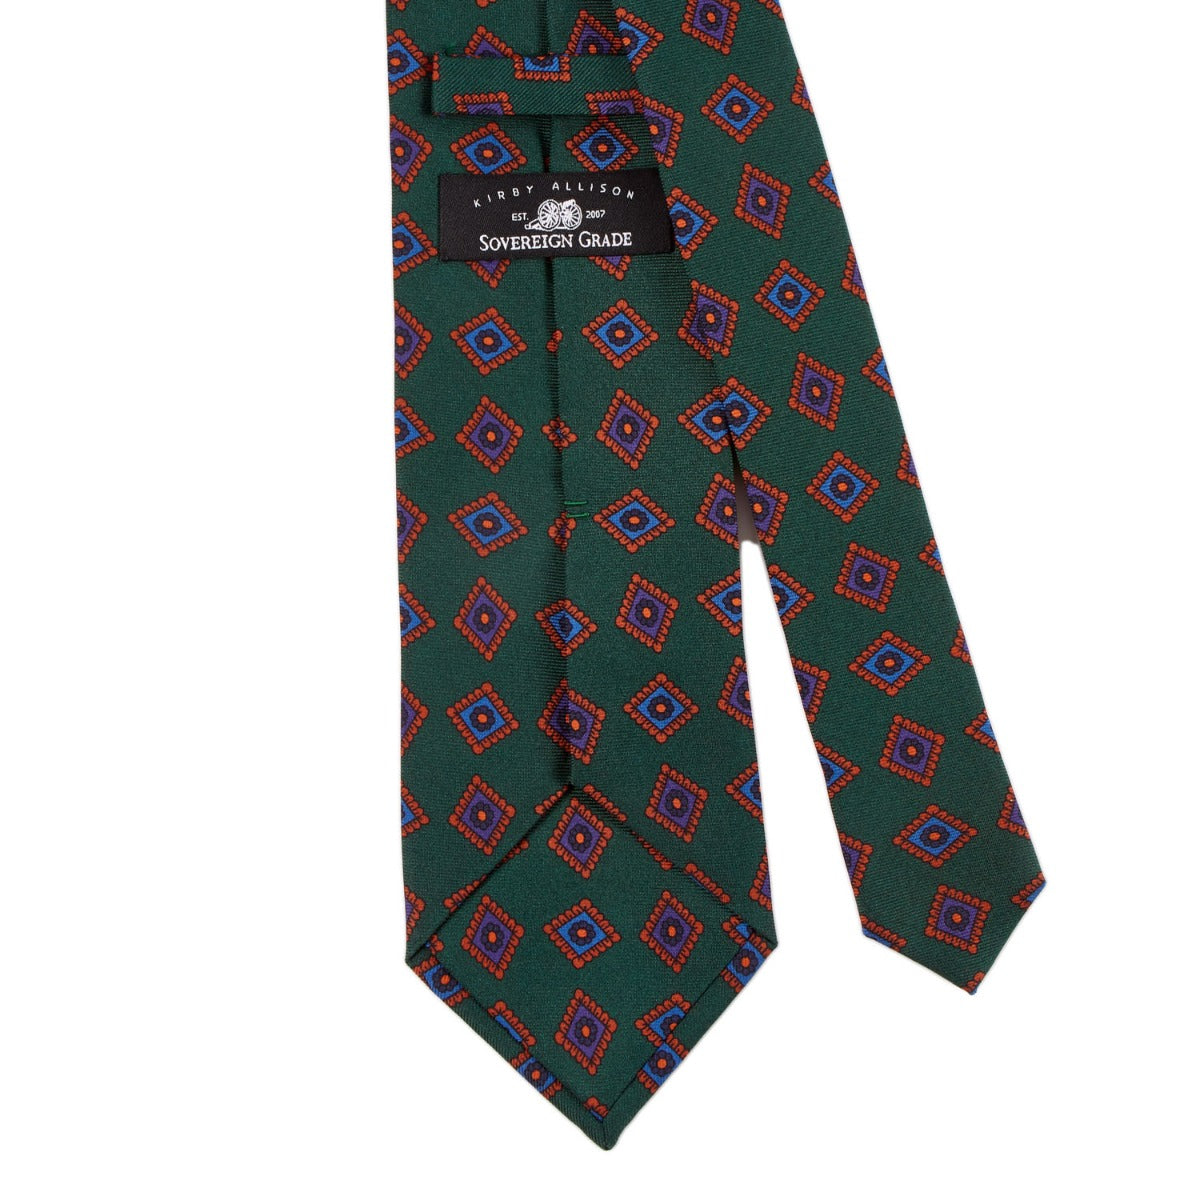 A Sovereign Grade Forrest Green Art Deco Ancient Madder Silk Tie with green, red, and blue diamonds, made in the United Kingdom, from KirbyAllison.com.